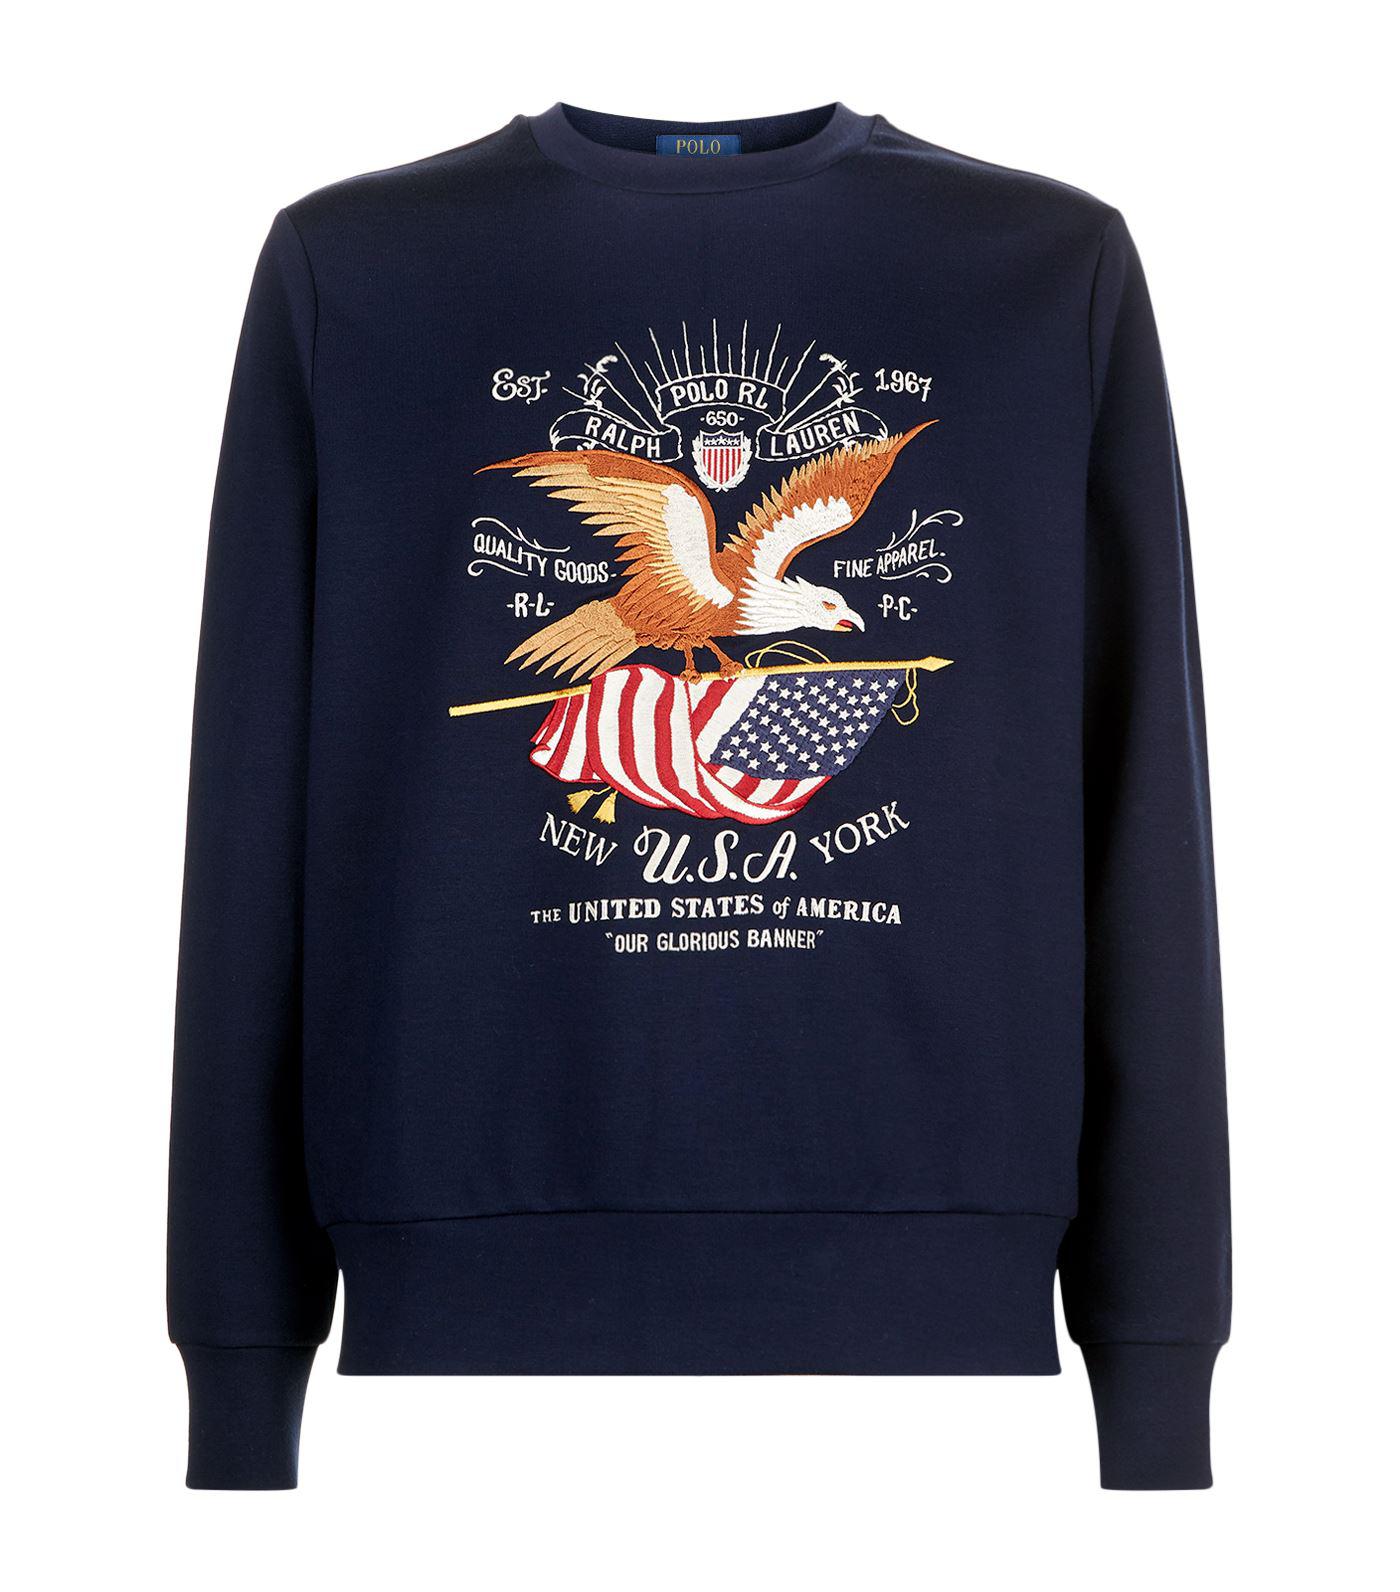 Polo Ralph Lauren Embroidered Eagle Sweatshirt in Navy (Blue) for Men - Lyst